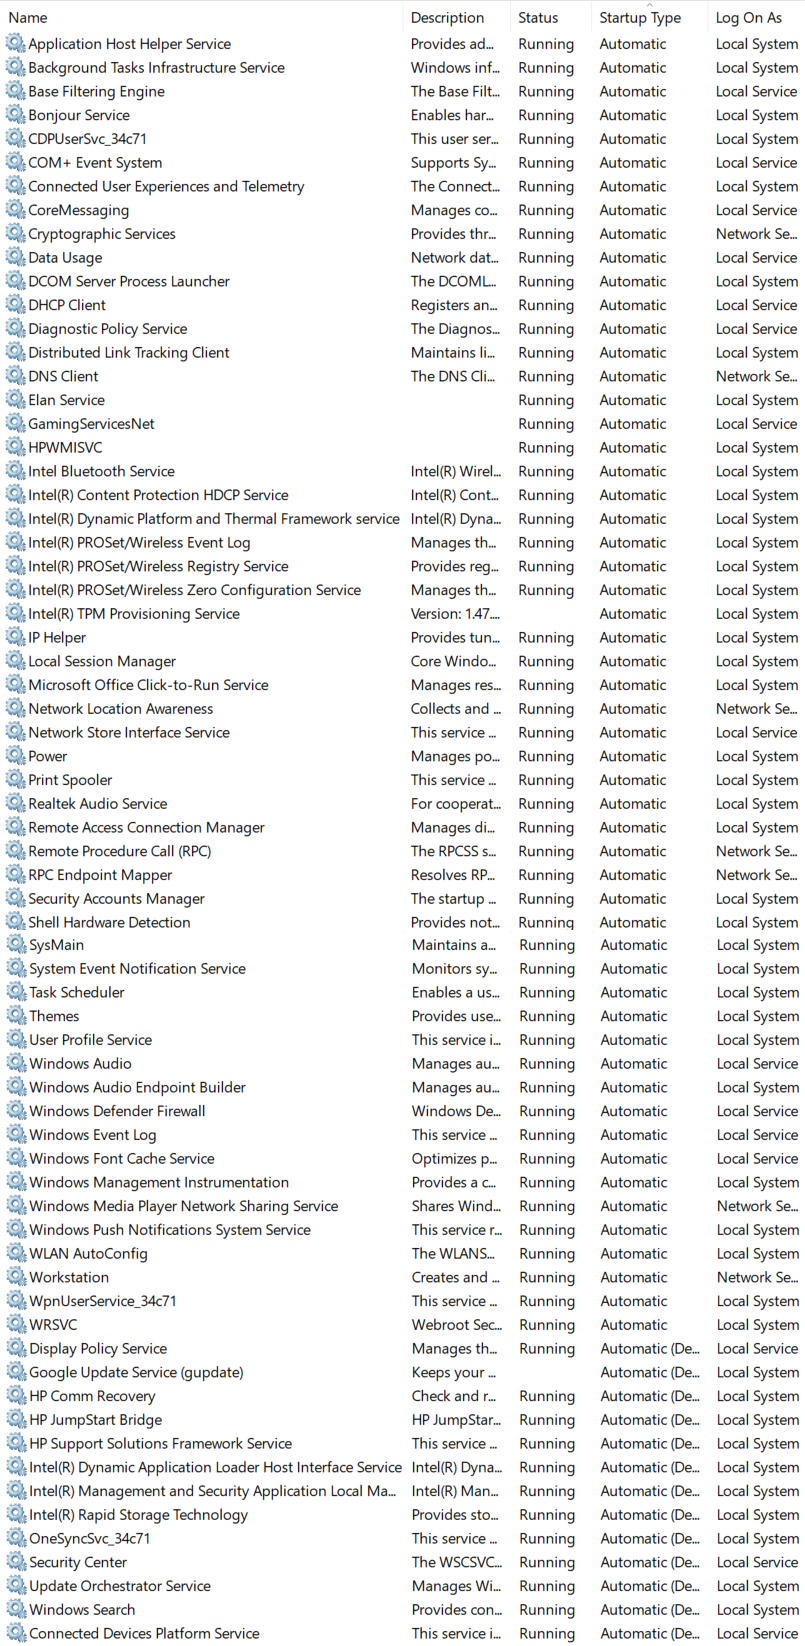 Can I Disable Any Of These Services Or Are They All Needed? 2b494b41-91e0-4625-b3bb-d19240414d83?upload=true.png